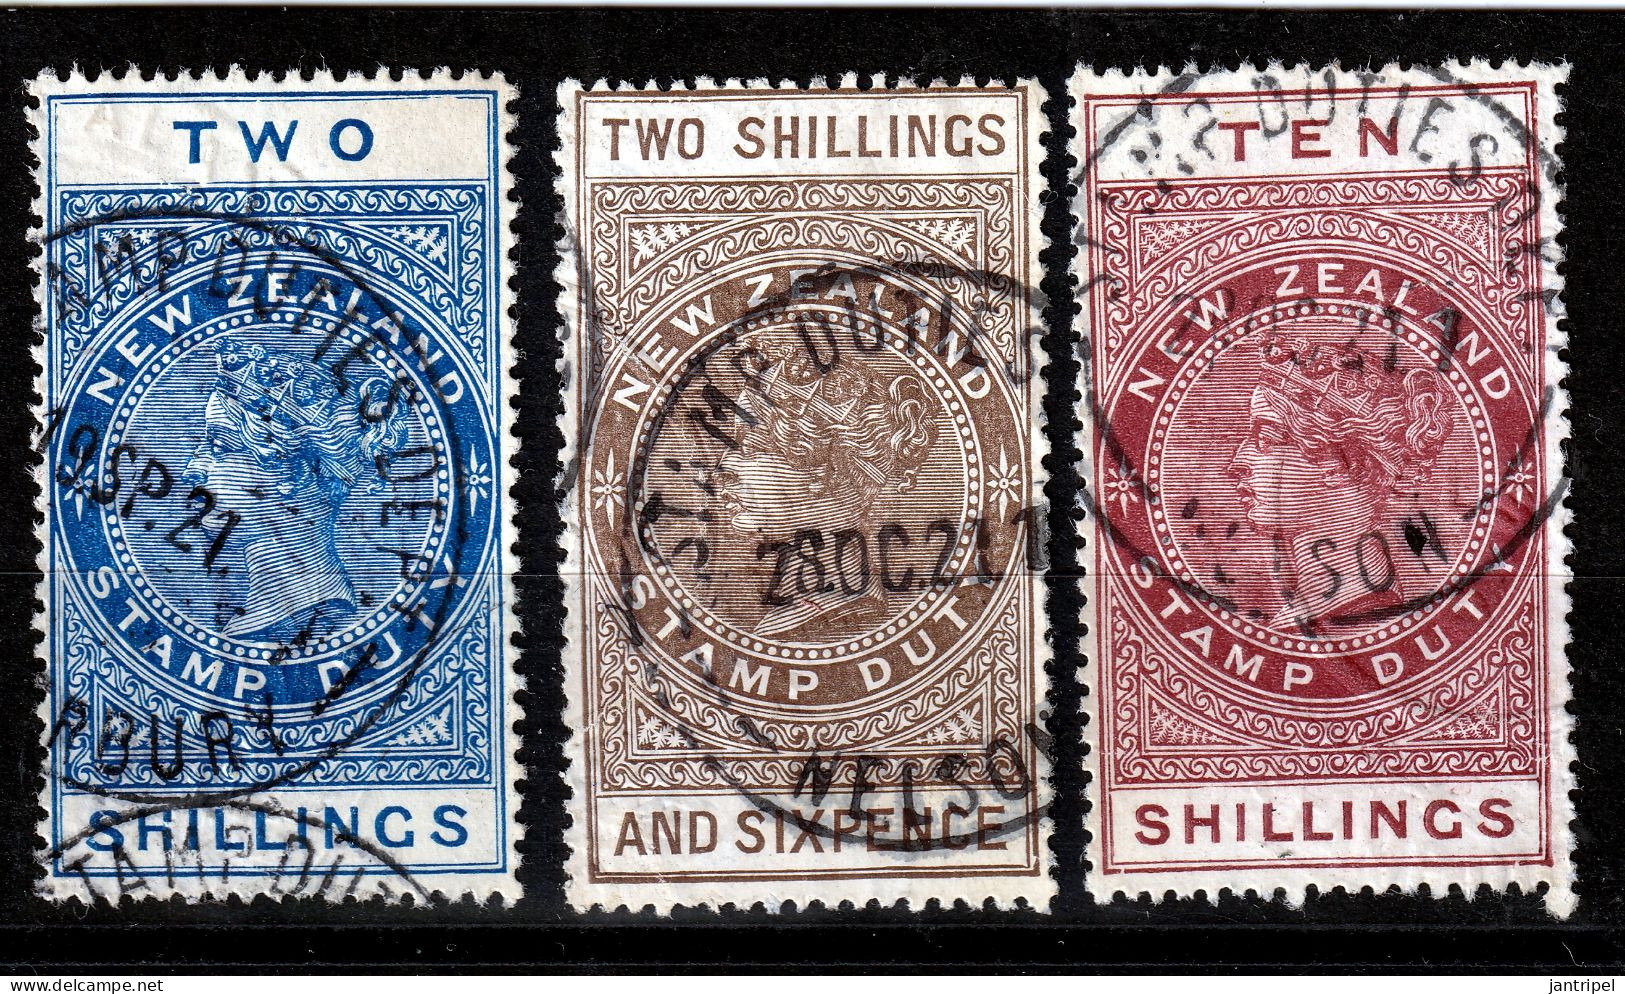 NEW ZEALAND 1882/1914 QV. TAX STAMPS 2/-  2/6   10/-  GOOD USED - Usados